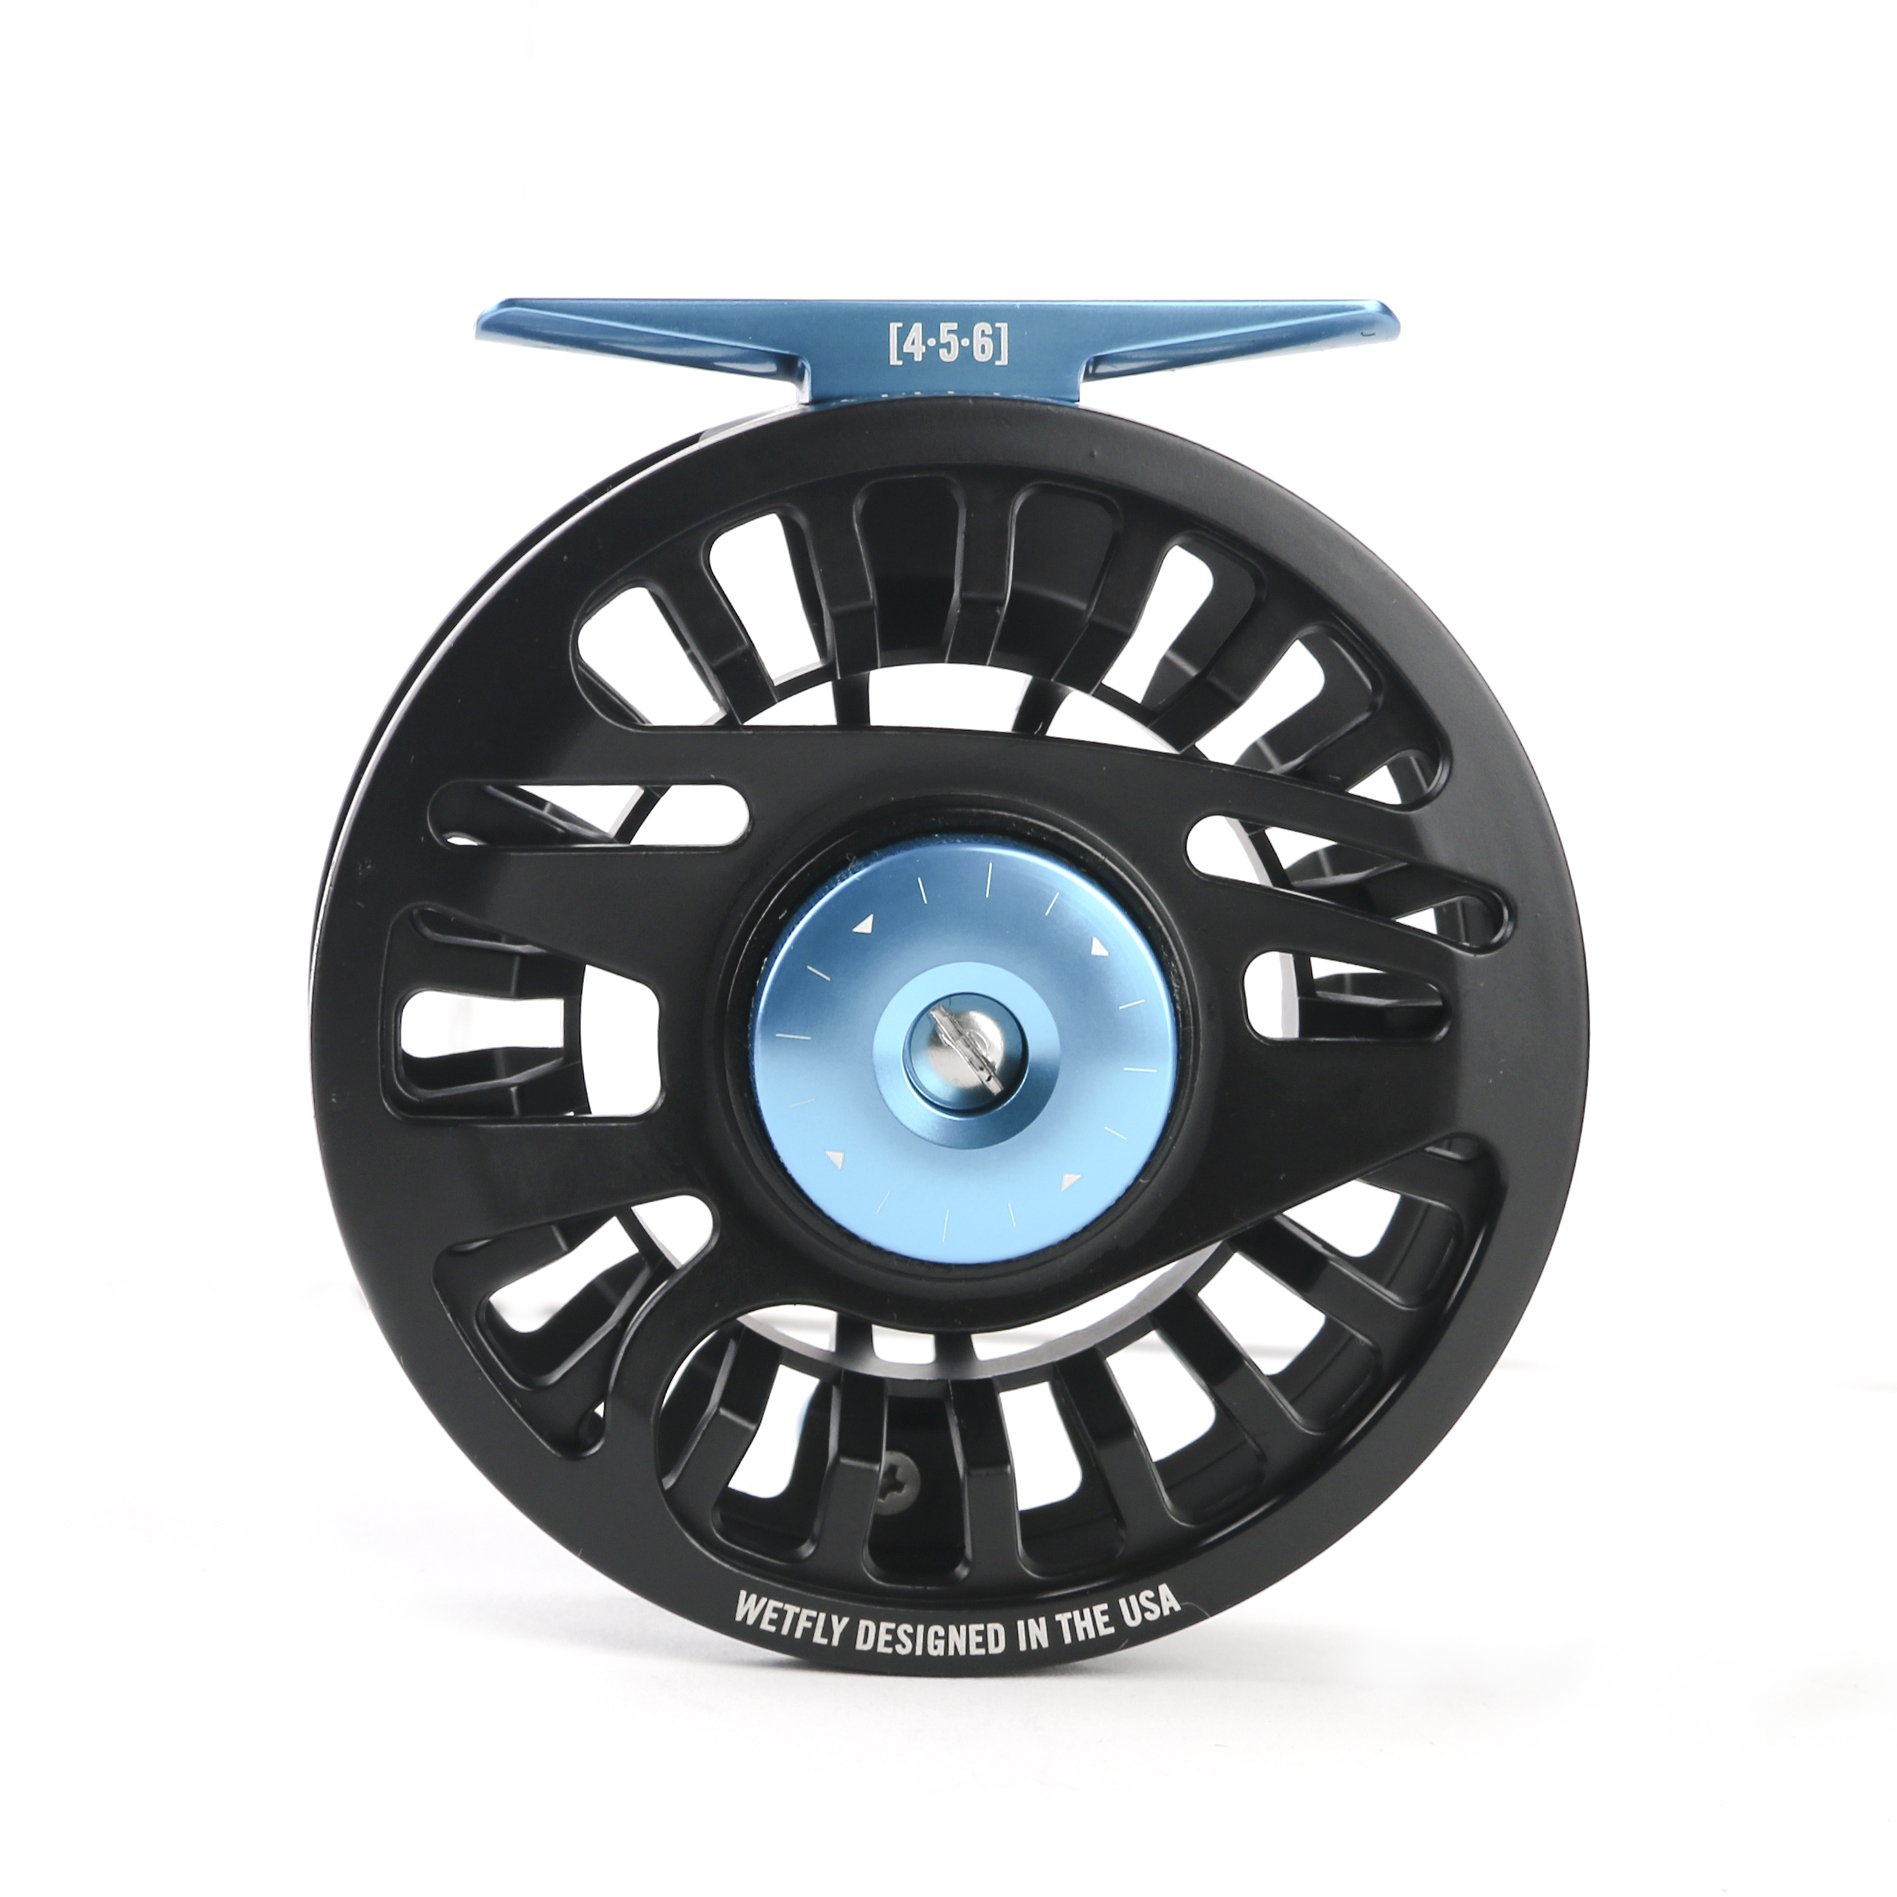  Maxcatch AVID PRO Fly Fishing Reel with CNC-machined